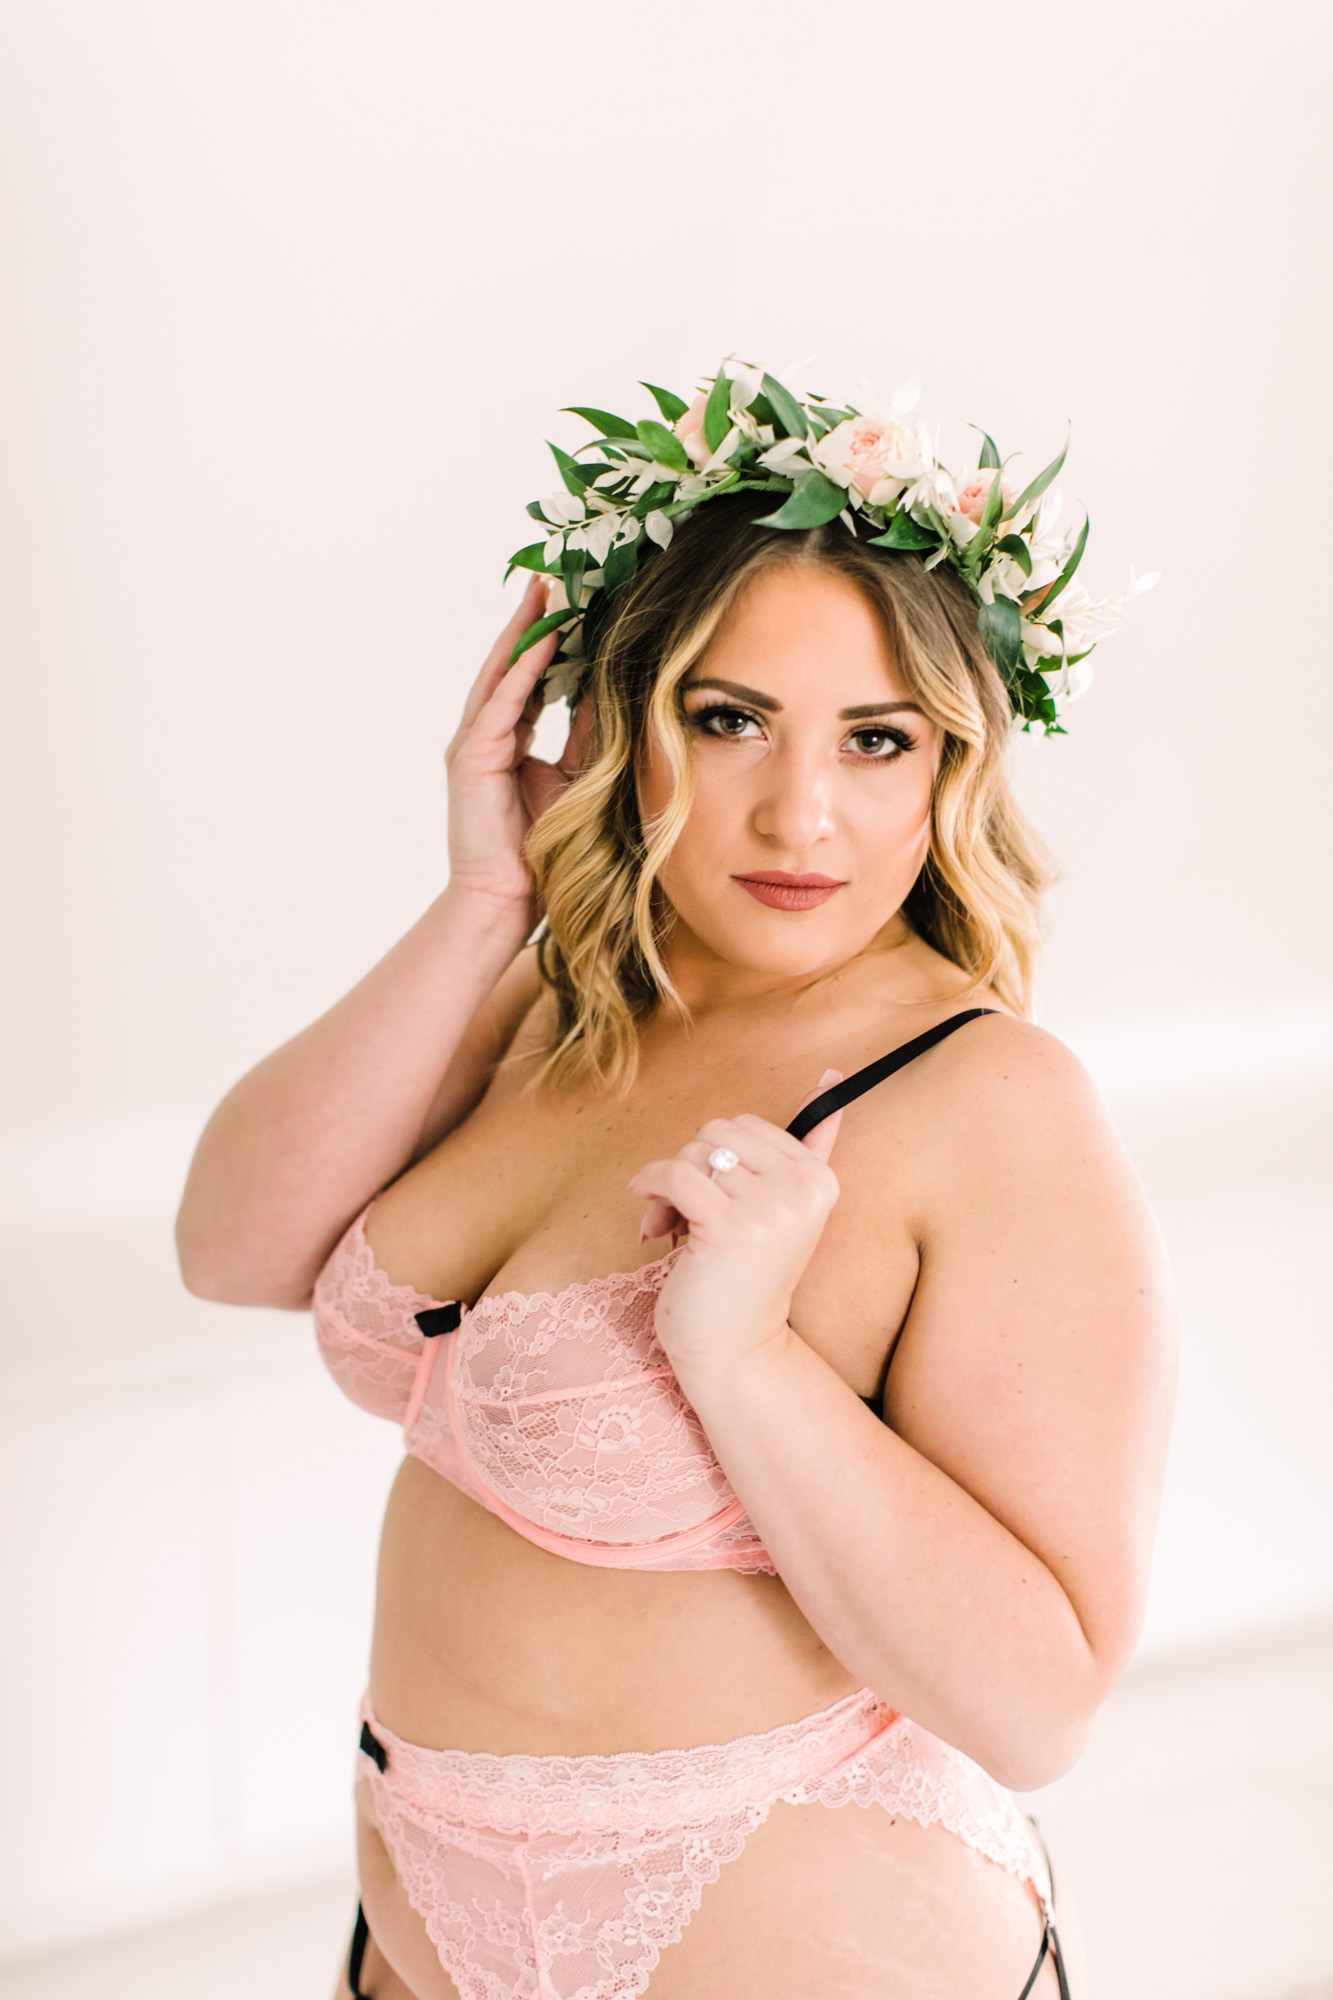 A woman poses while wearing pastel pink lingerie and a floral crown for her bridal boudoir session.